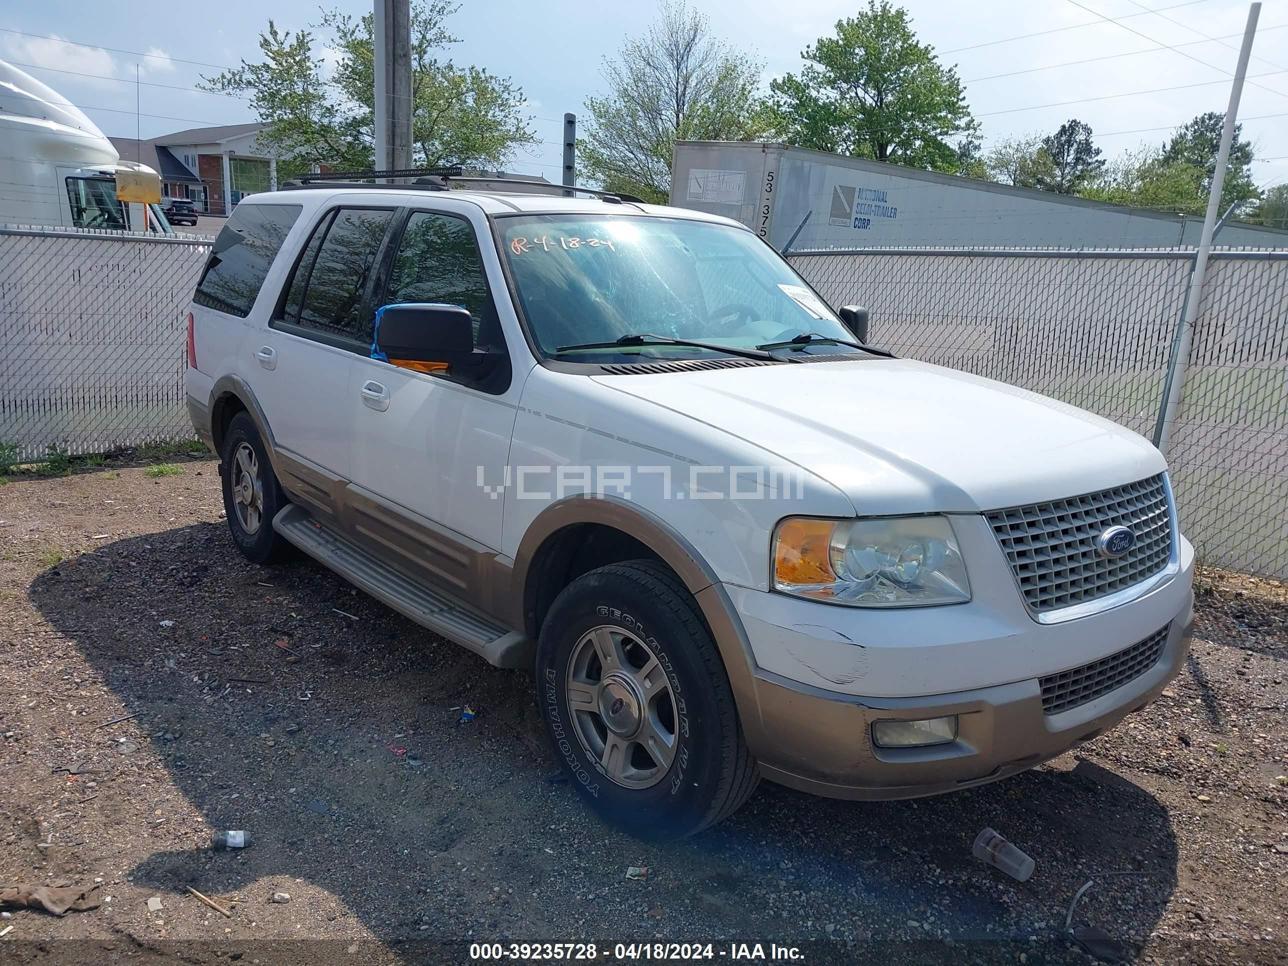 VIN: 1FMFU17L44LB88798 - ford expedition